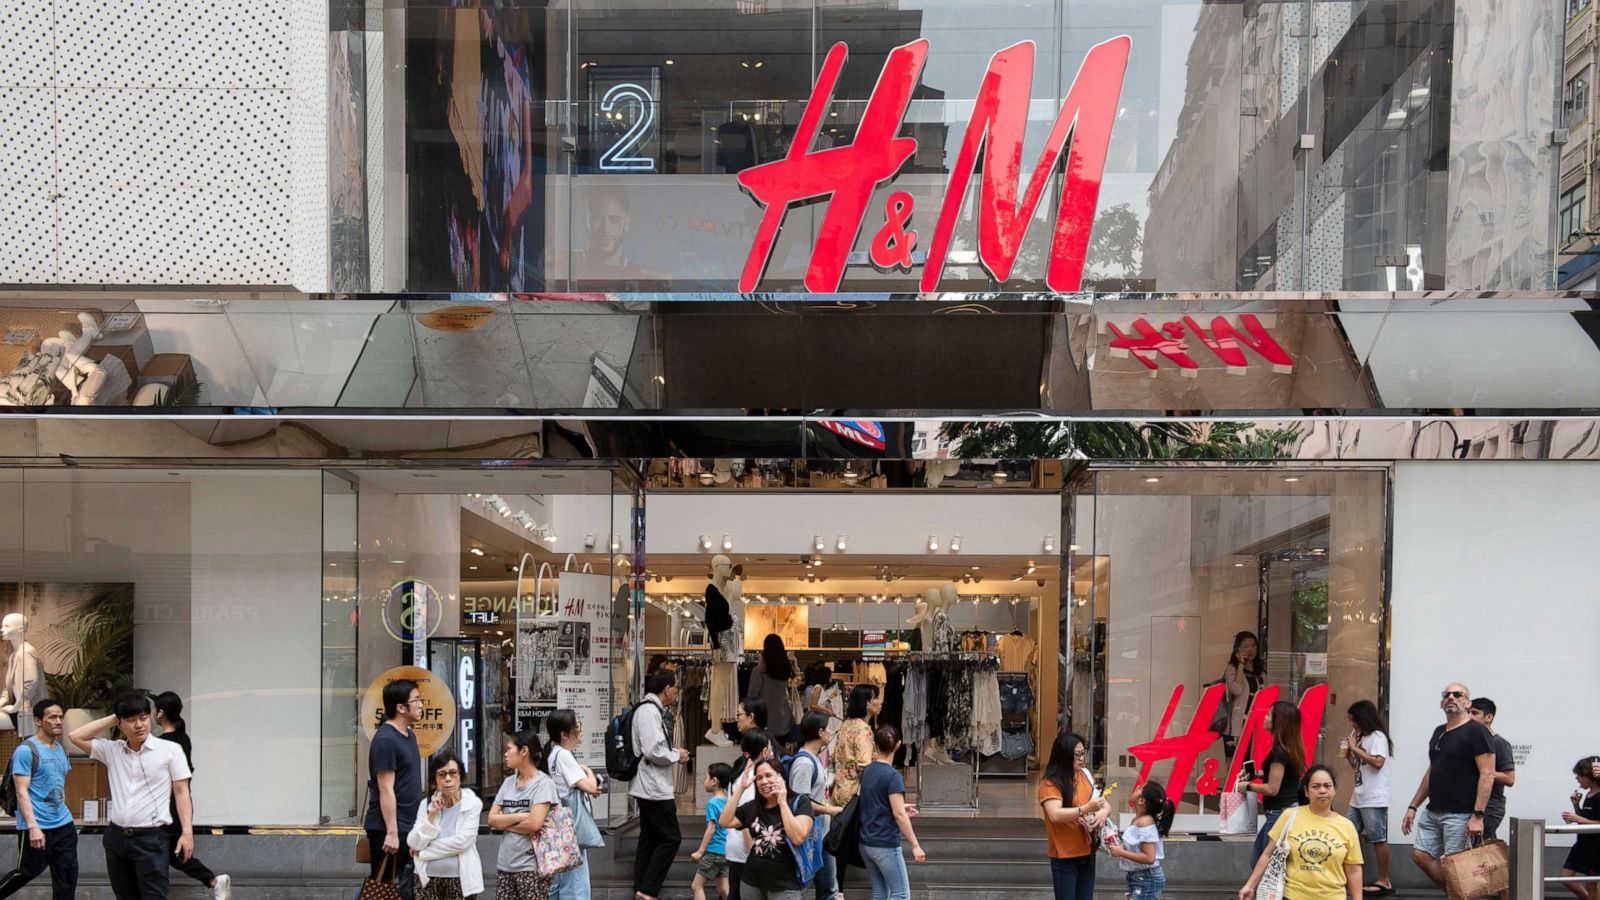 As climate activism surges, fast fashion brands like H&M and Zara may  suffer - ABC News